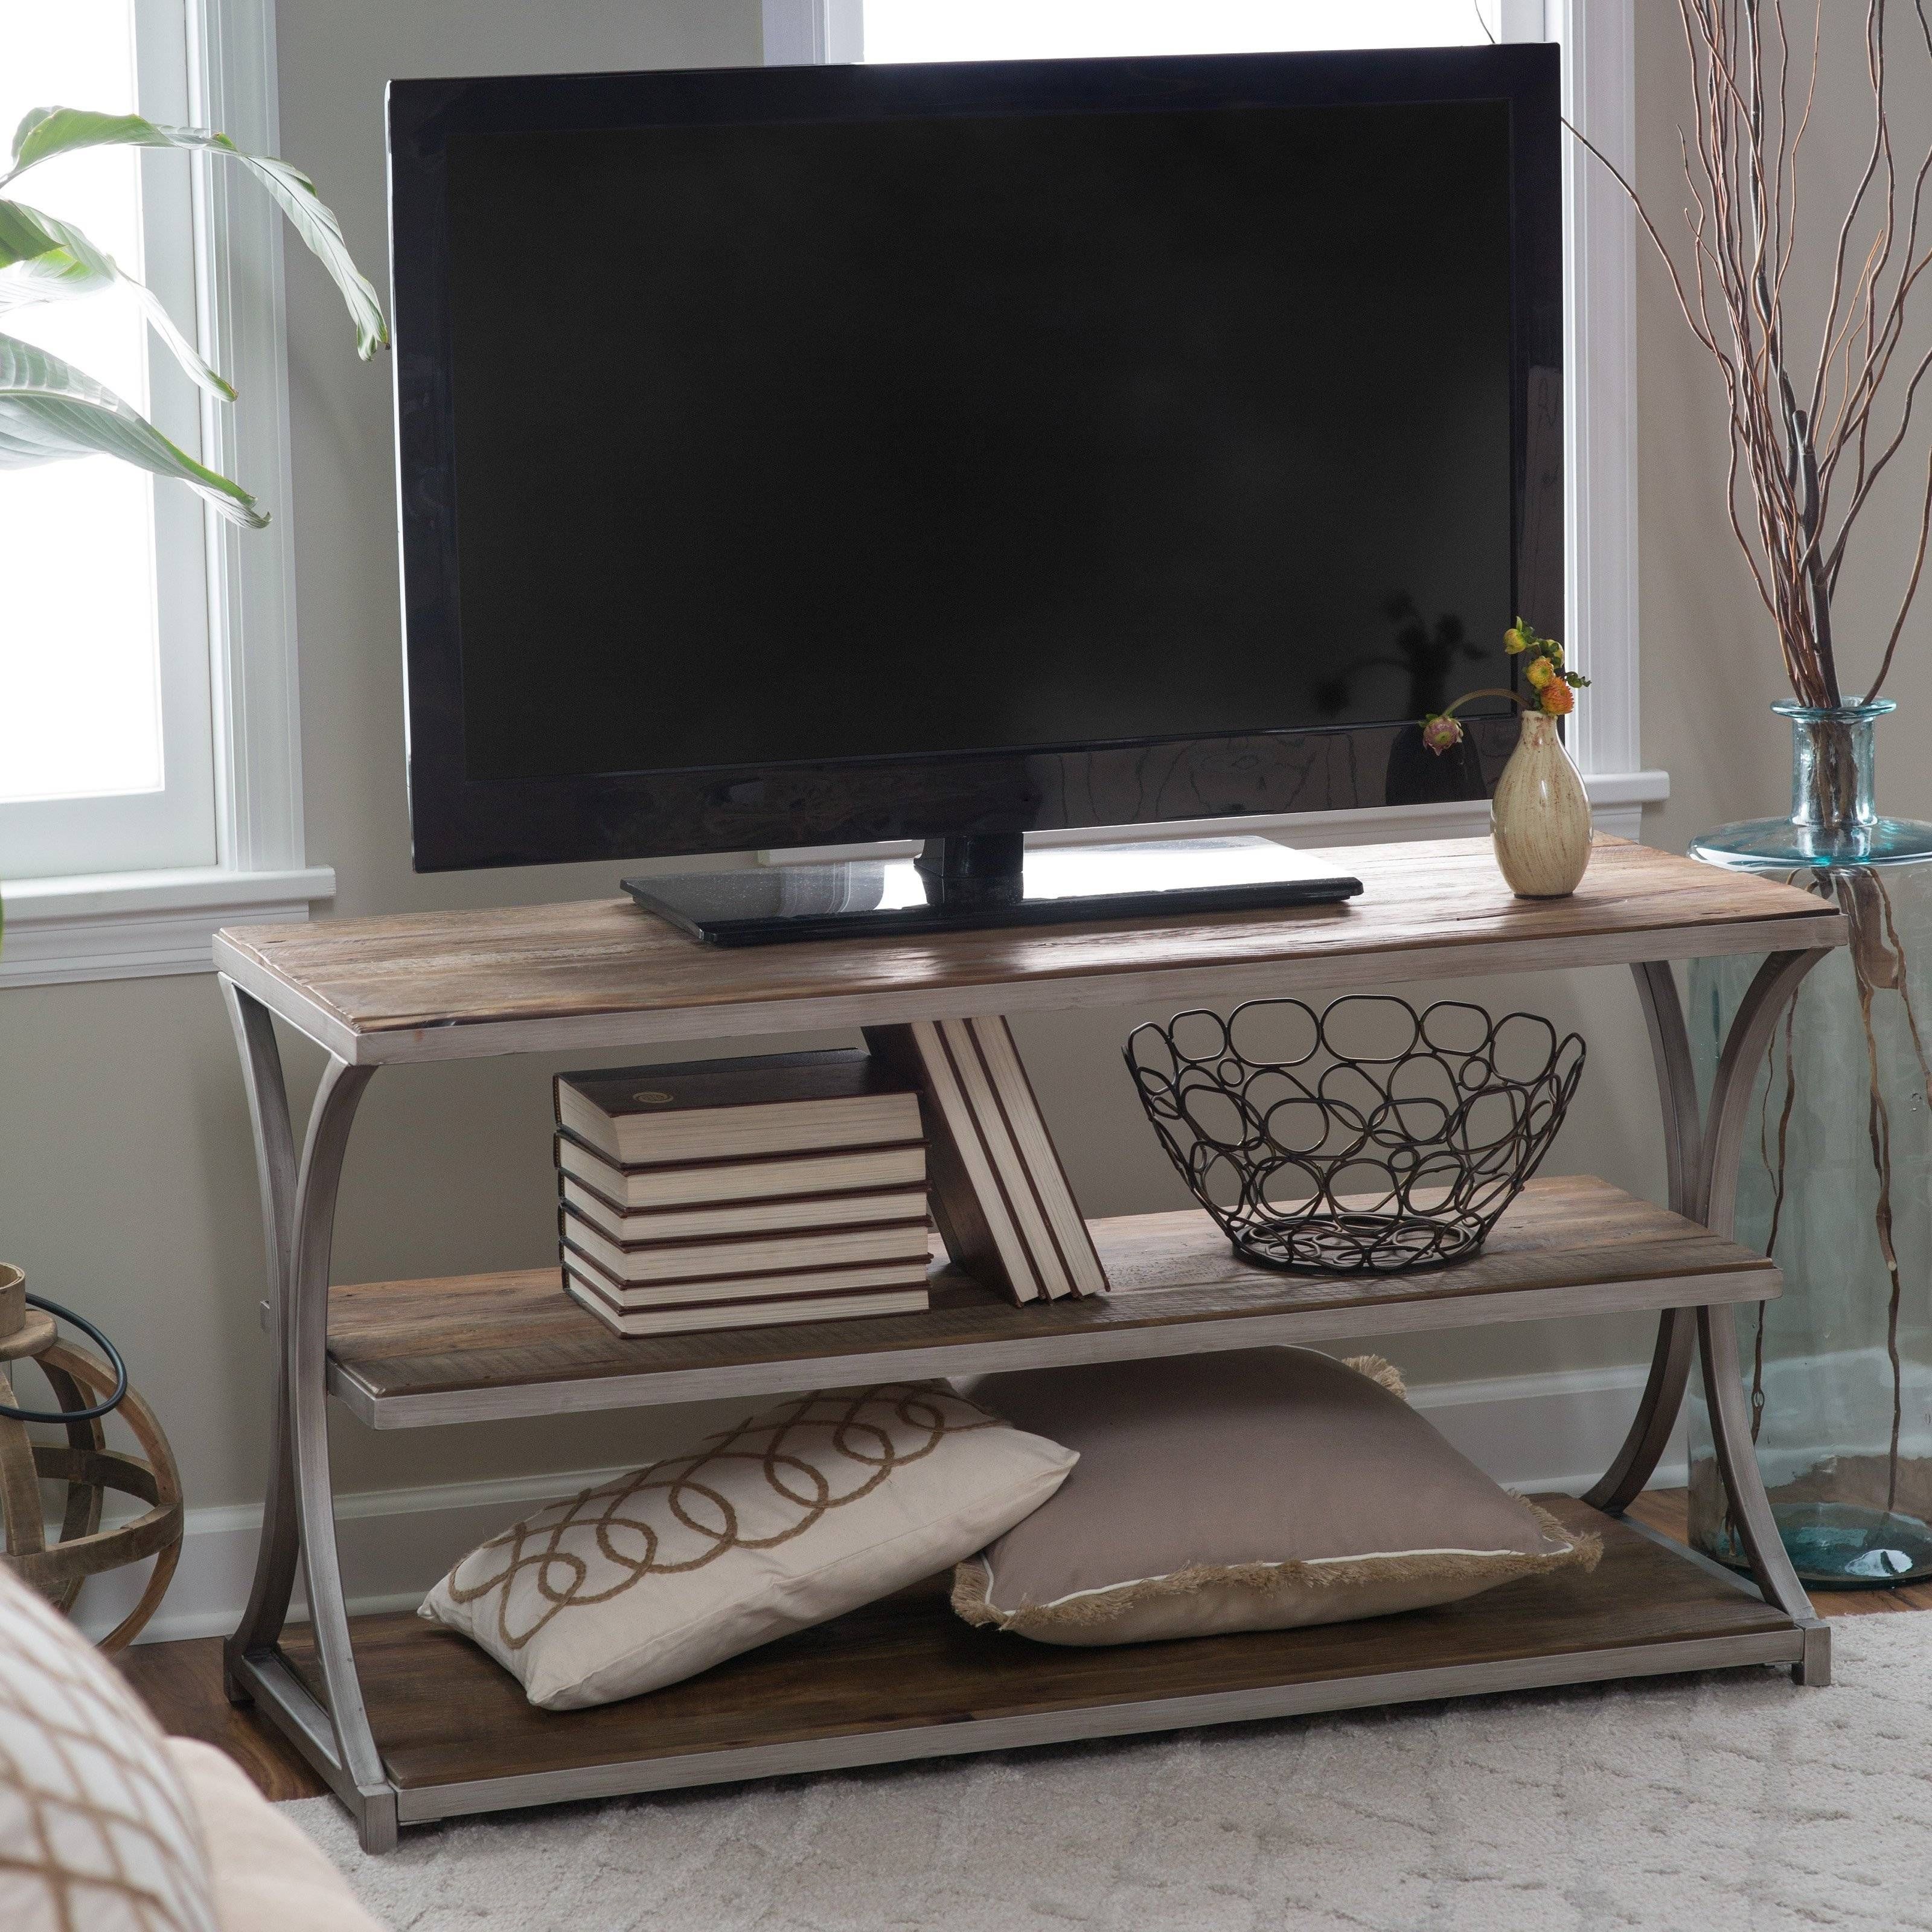 Contemporary & Modern Tv Stands | Hayneedle Throughout Sleek Tv Stands (View 14 of 15)